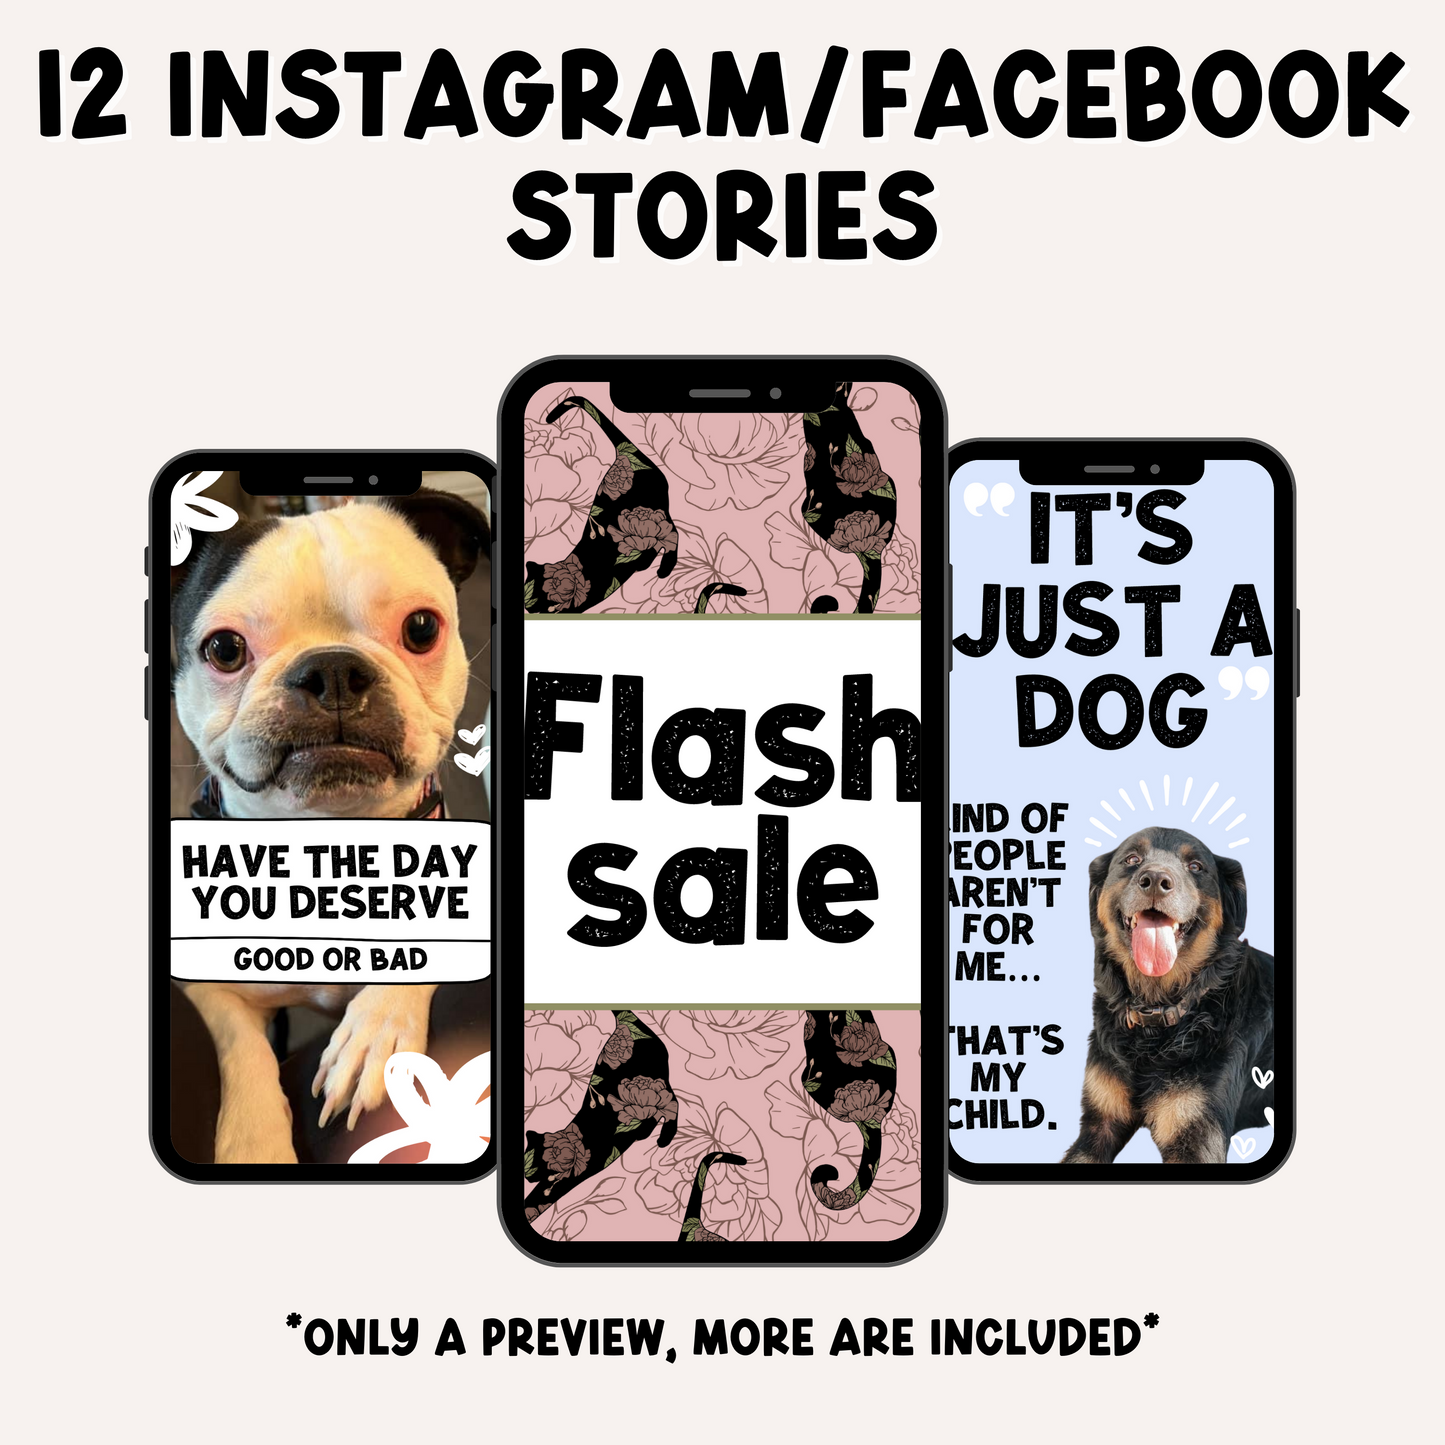 Pets Business Engagement & Social Media Content Graphics Collection